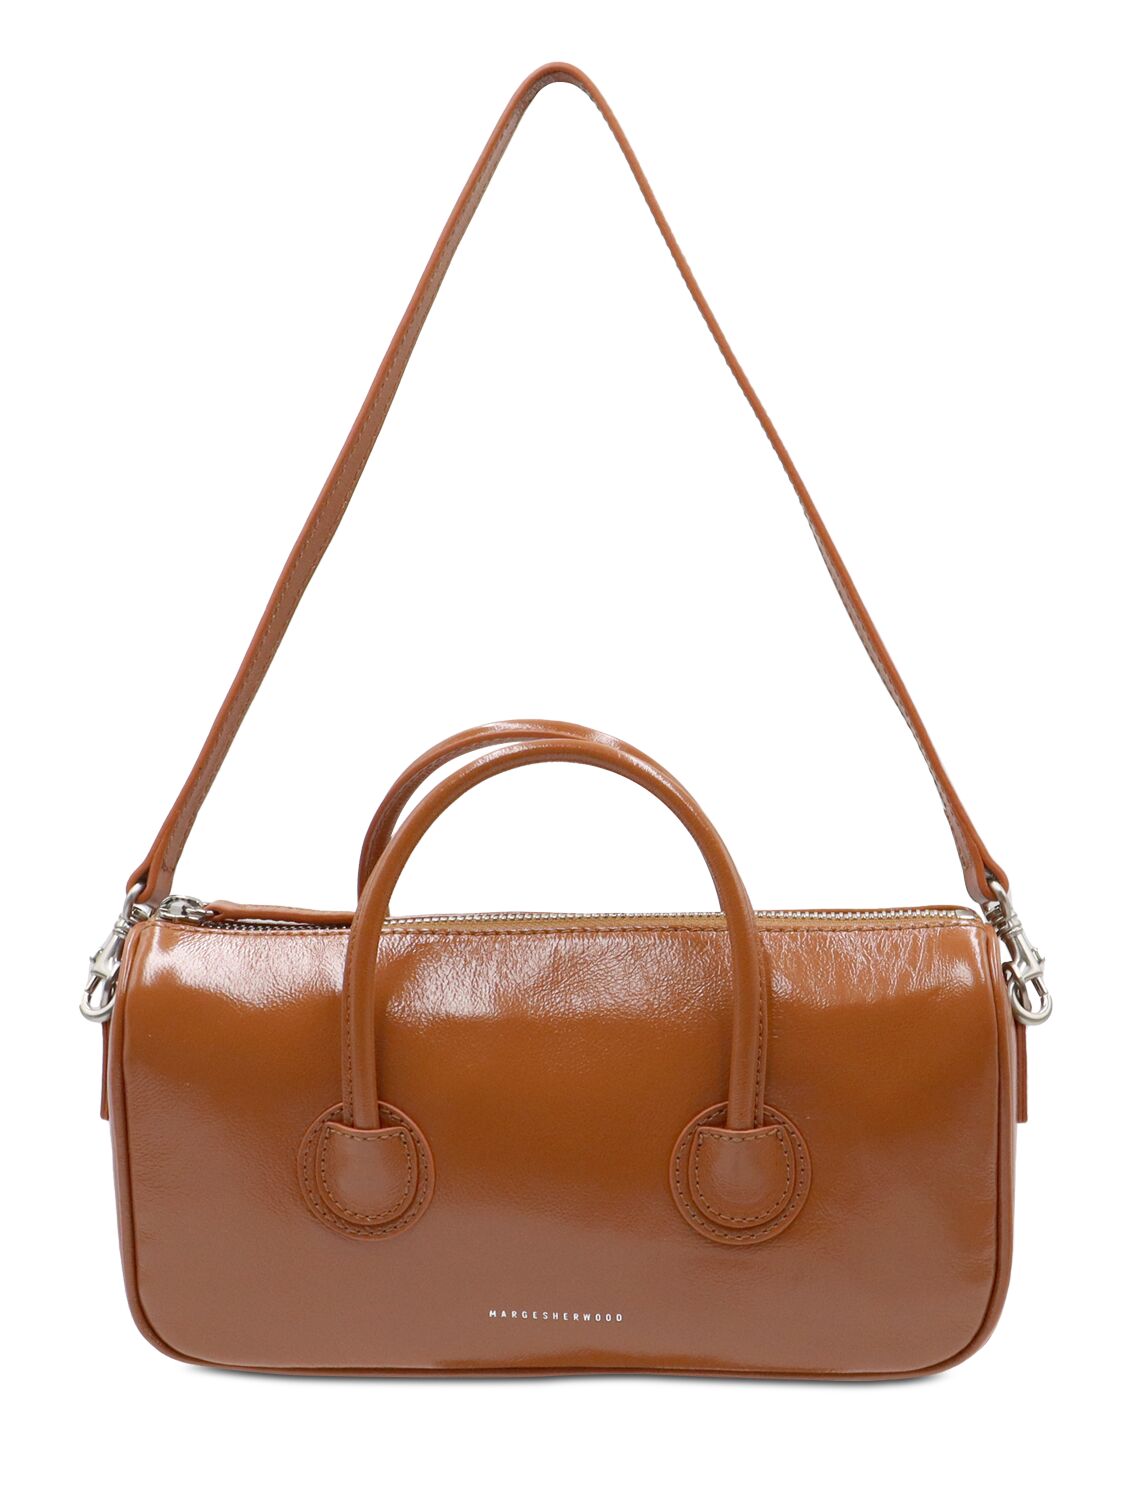 Marge Sherwood Small Zipper Leather Top Handle Bag In Tan Glossy Plai